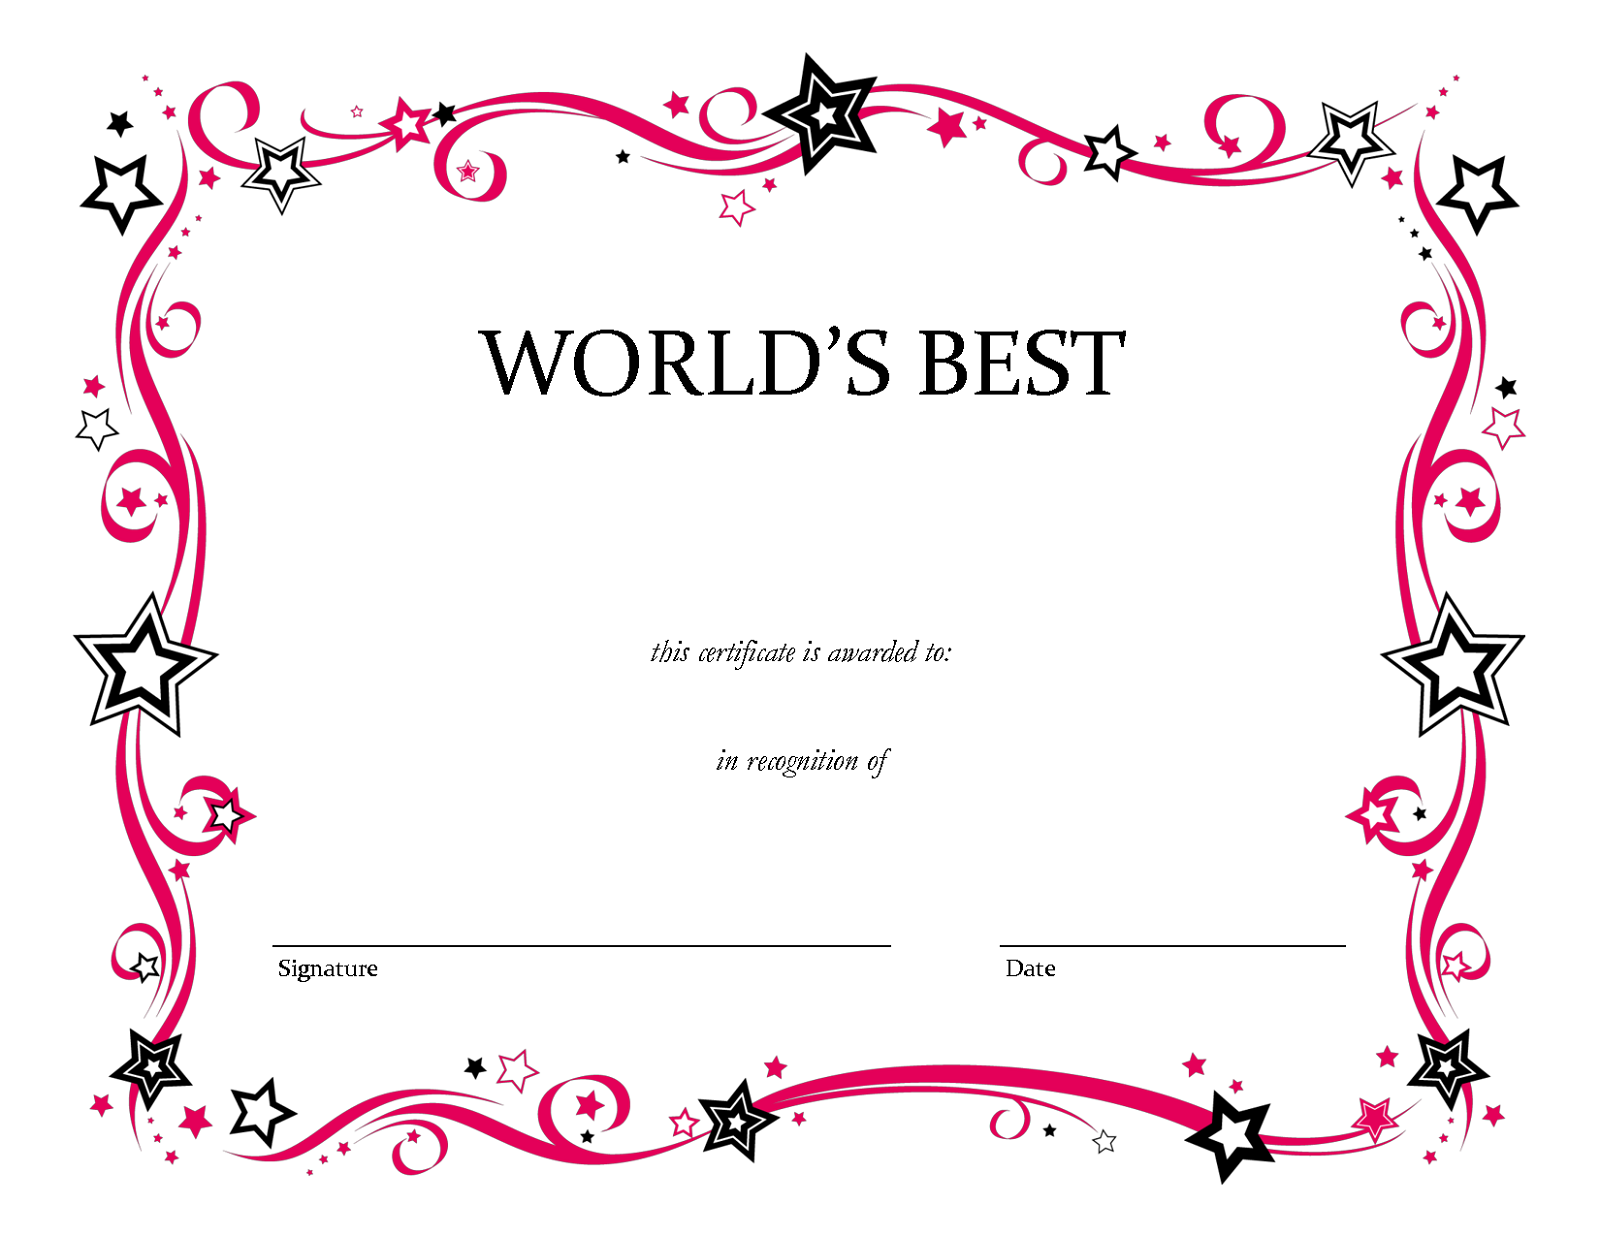 Blank Certificate Templates to Print | Activity Shelter
 Blank Certificate Templates For Word Free